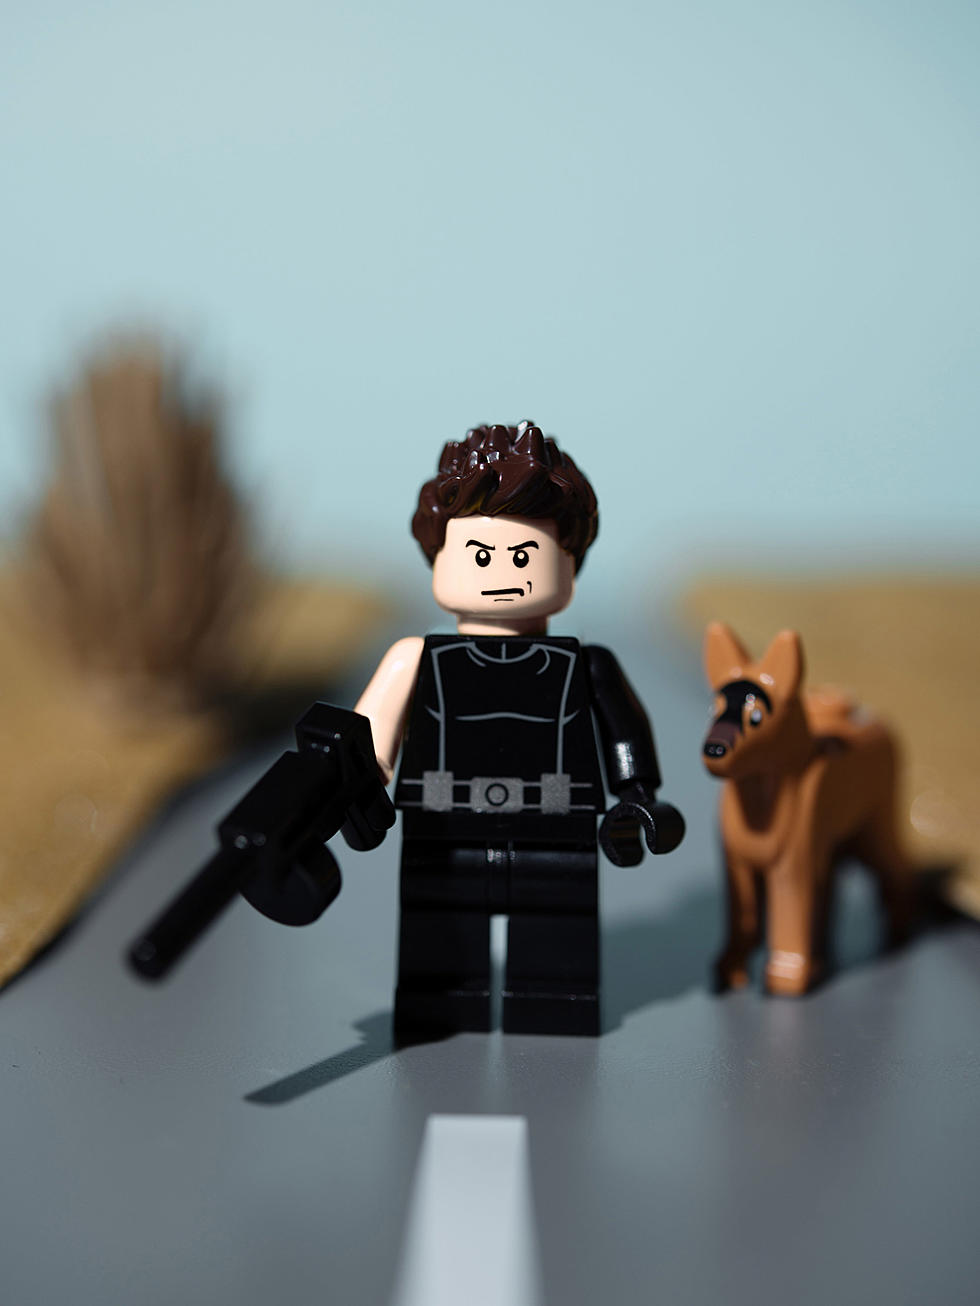 Are Lego’s the Tool of Satan?